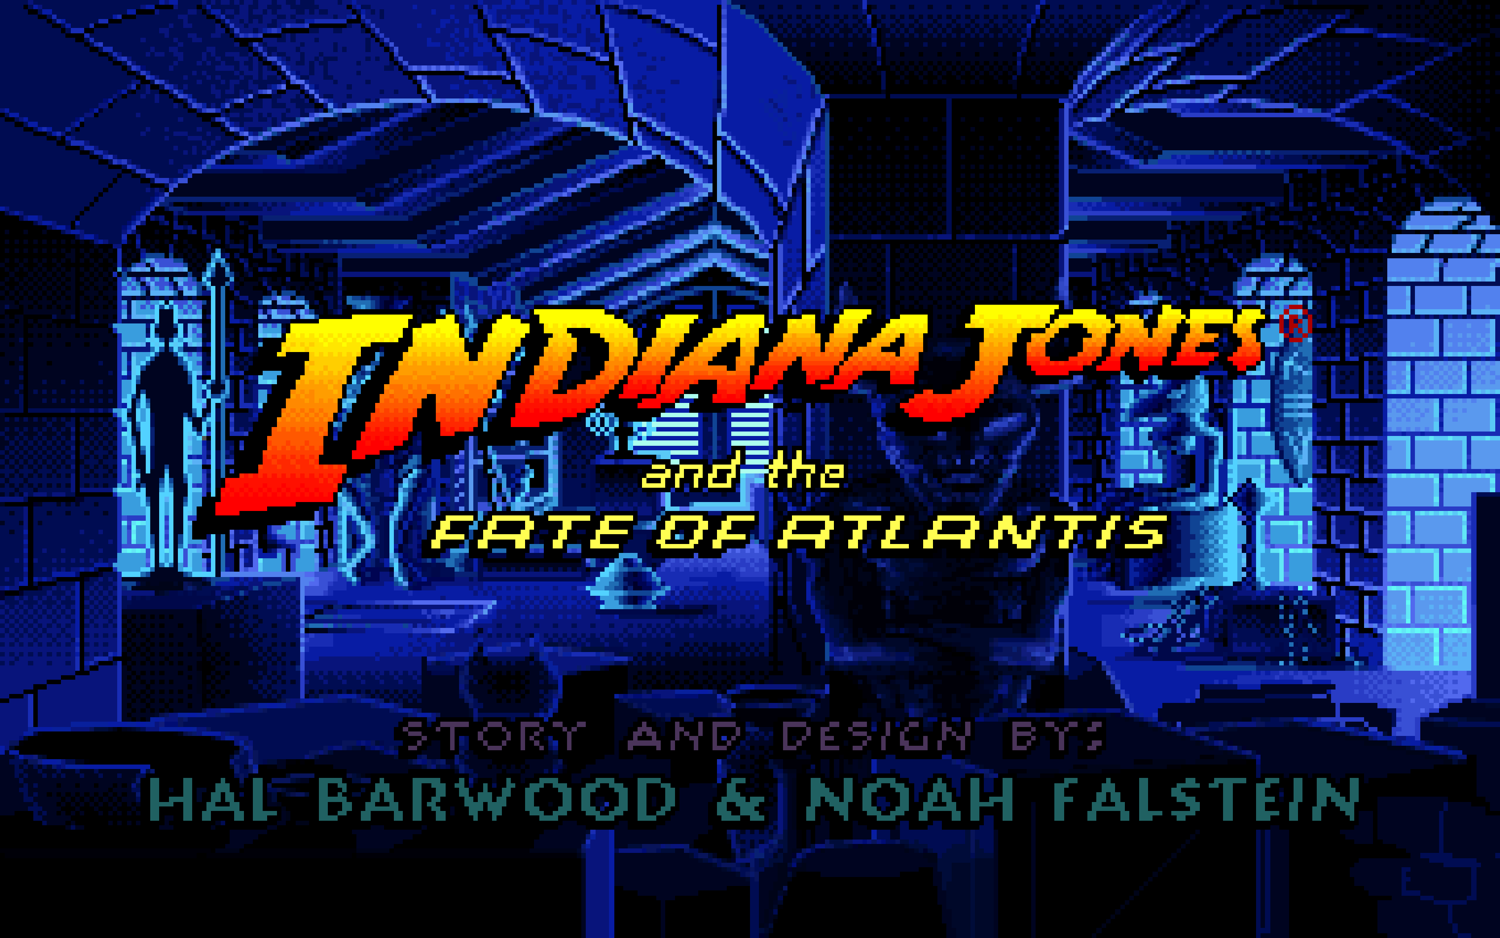 The title card for the LucasArts graphic adventure Indiana Jones and the Fate of Atlantis